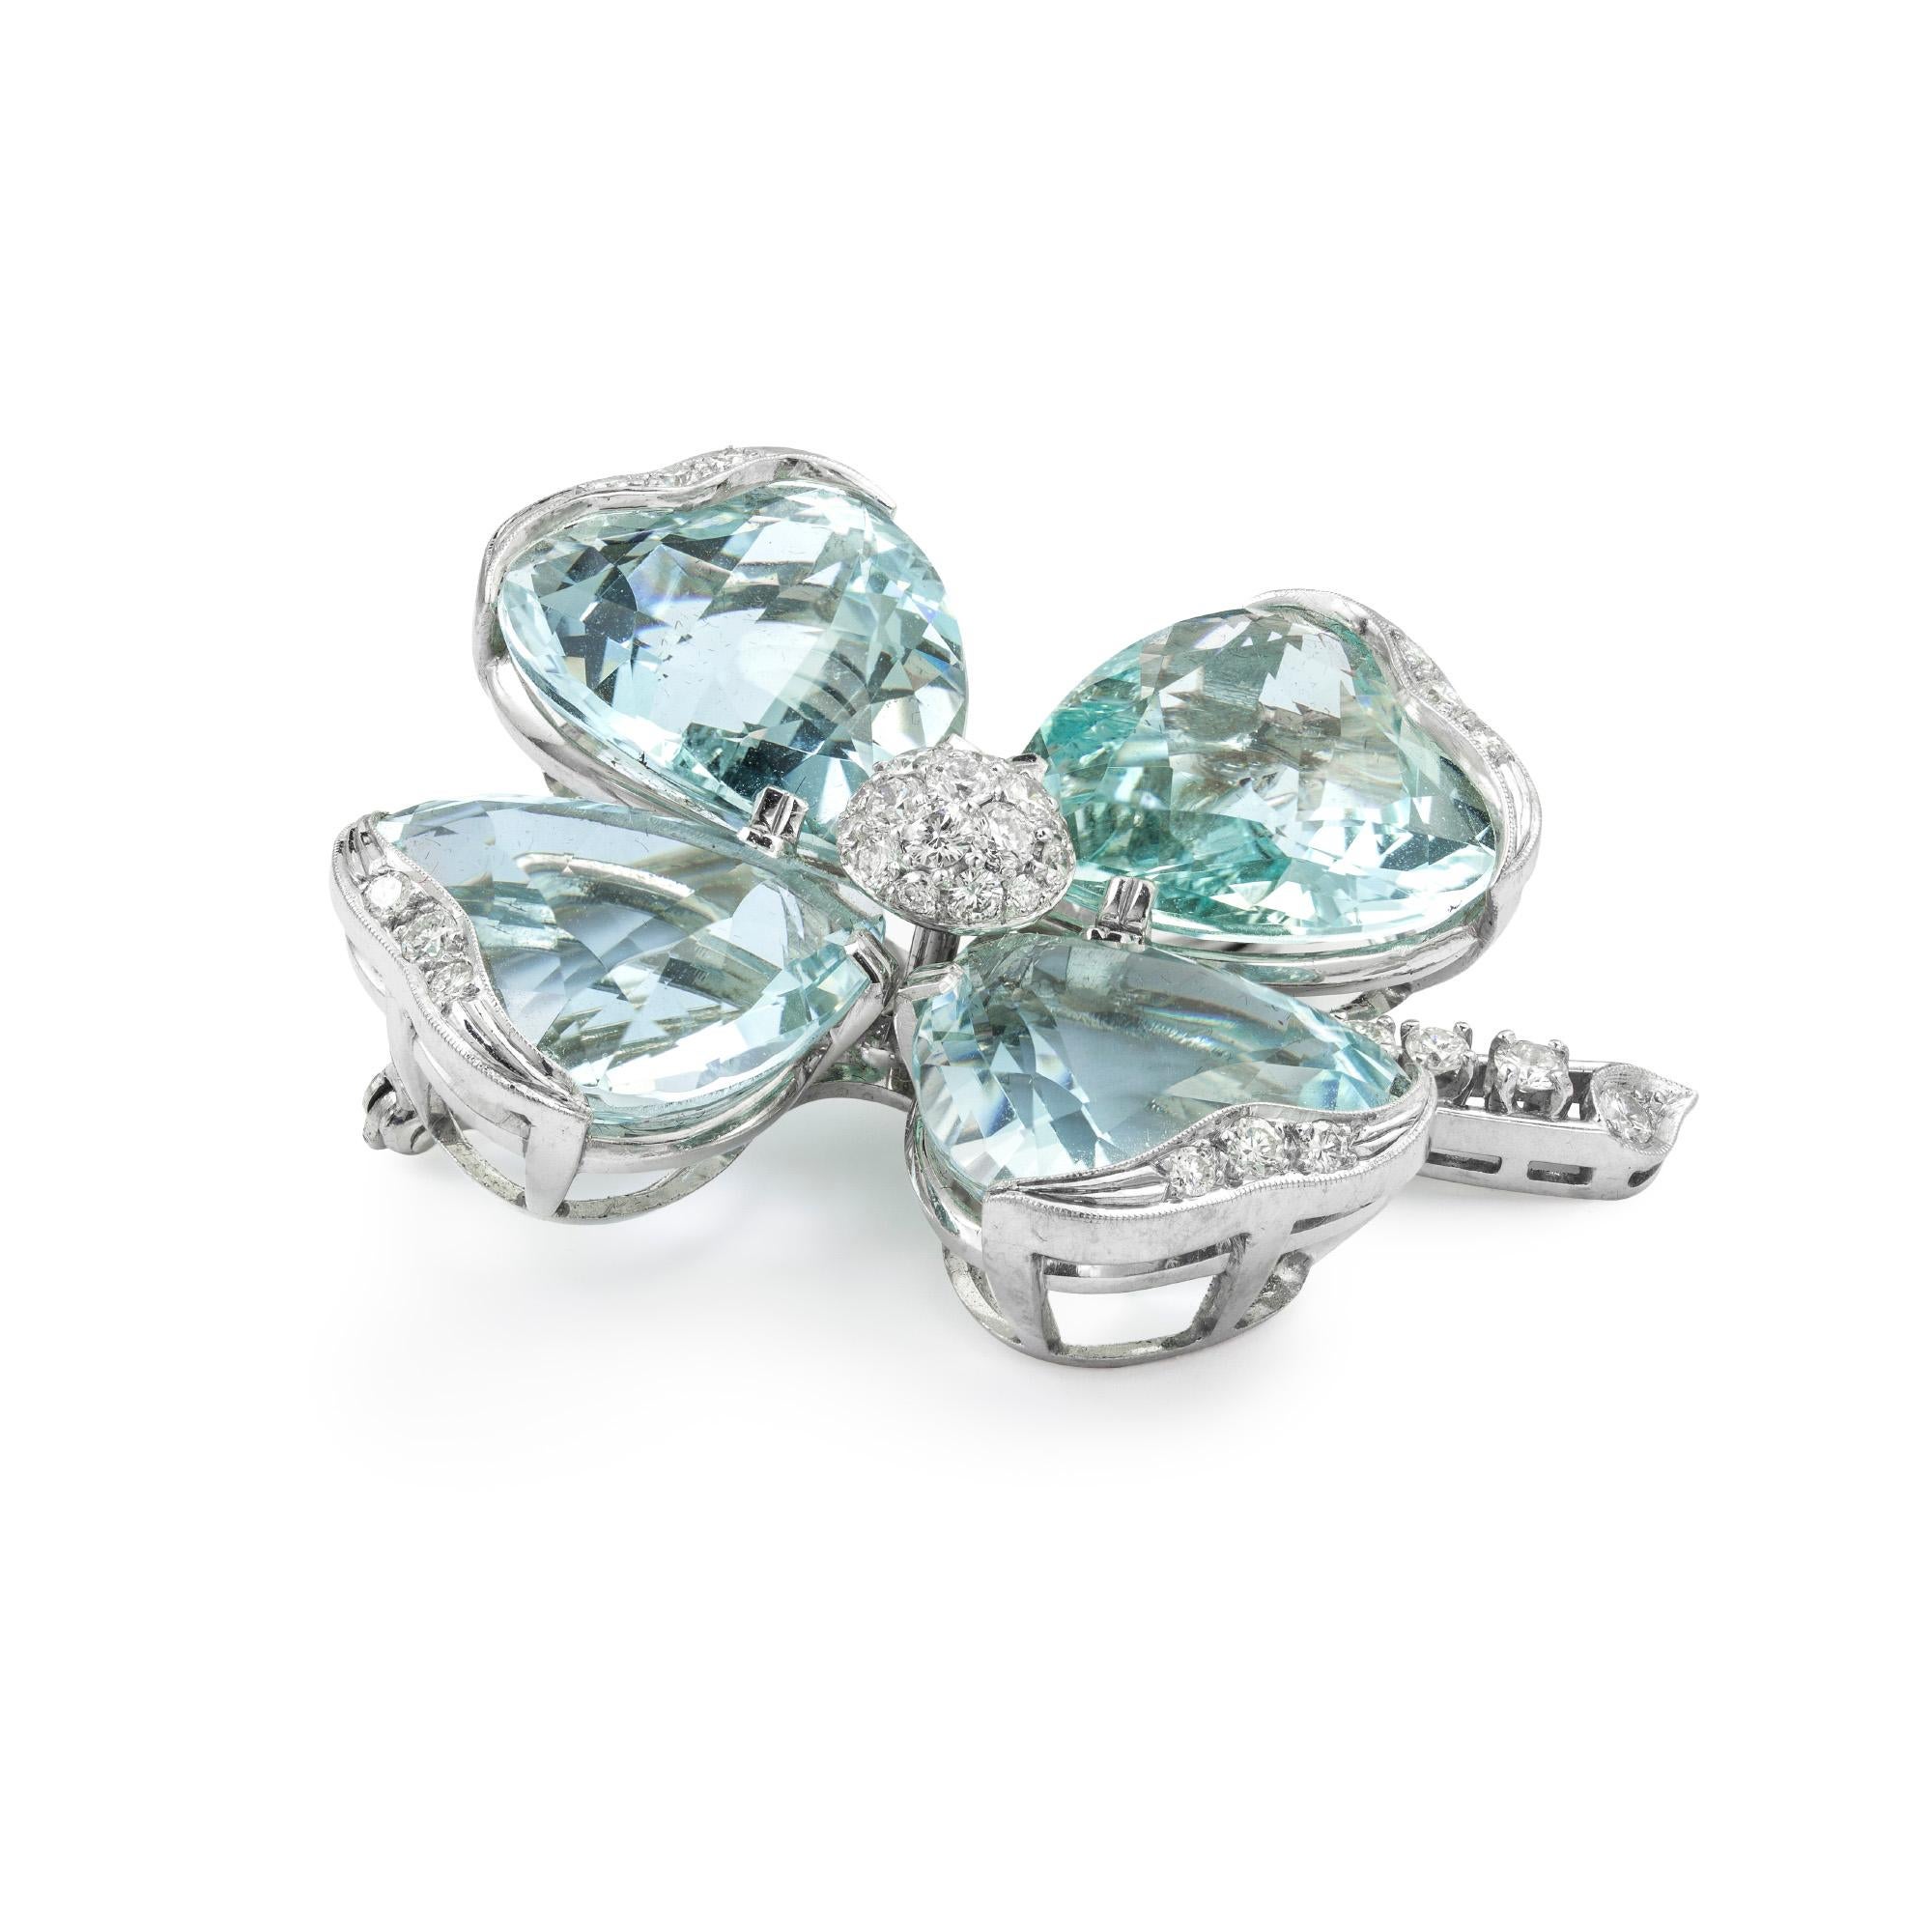 A vintage aquamarine and diamond flower head brooch, the brooch with round brilliant-cut diamond set domed centre surrounded by four heart shape aquamarine set petals each measuring approximately 18.2 x 18.5mm and estimated to weigh a total of 80